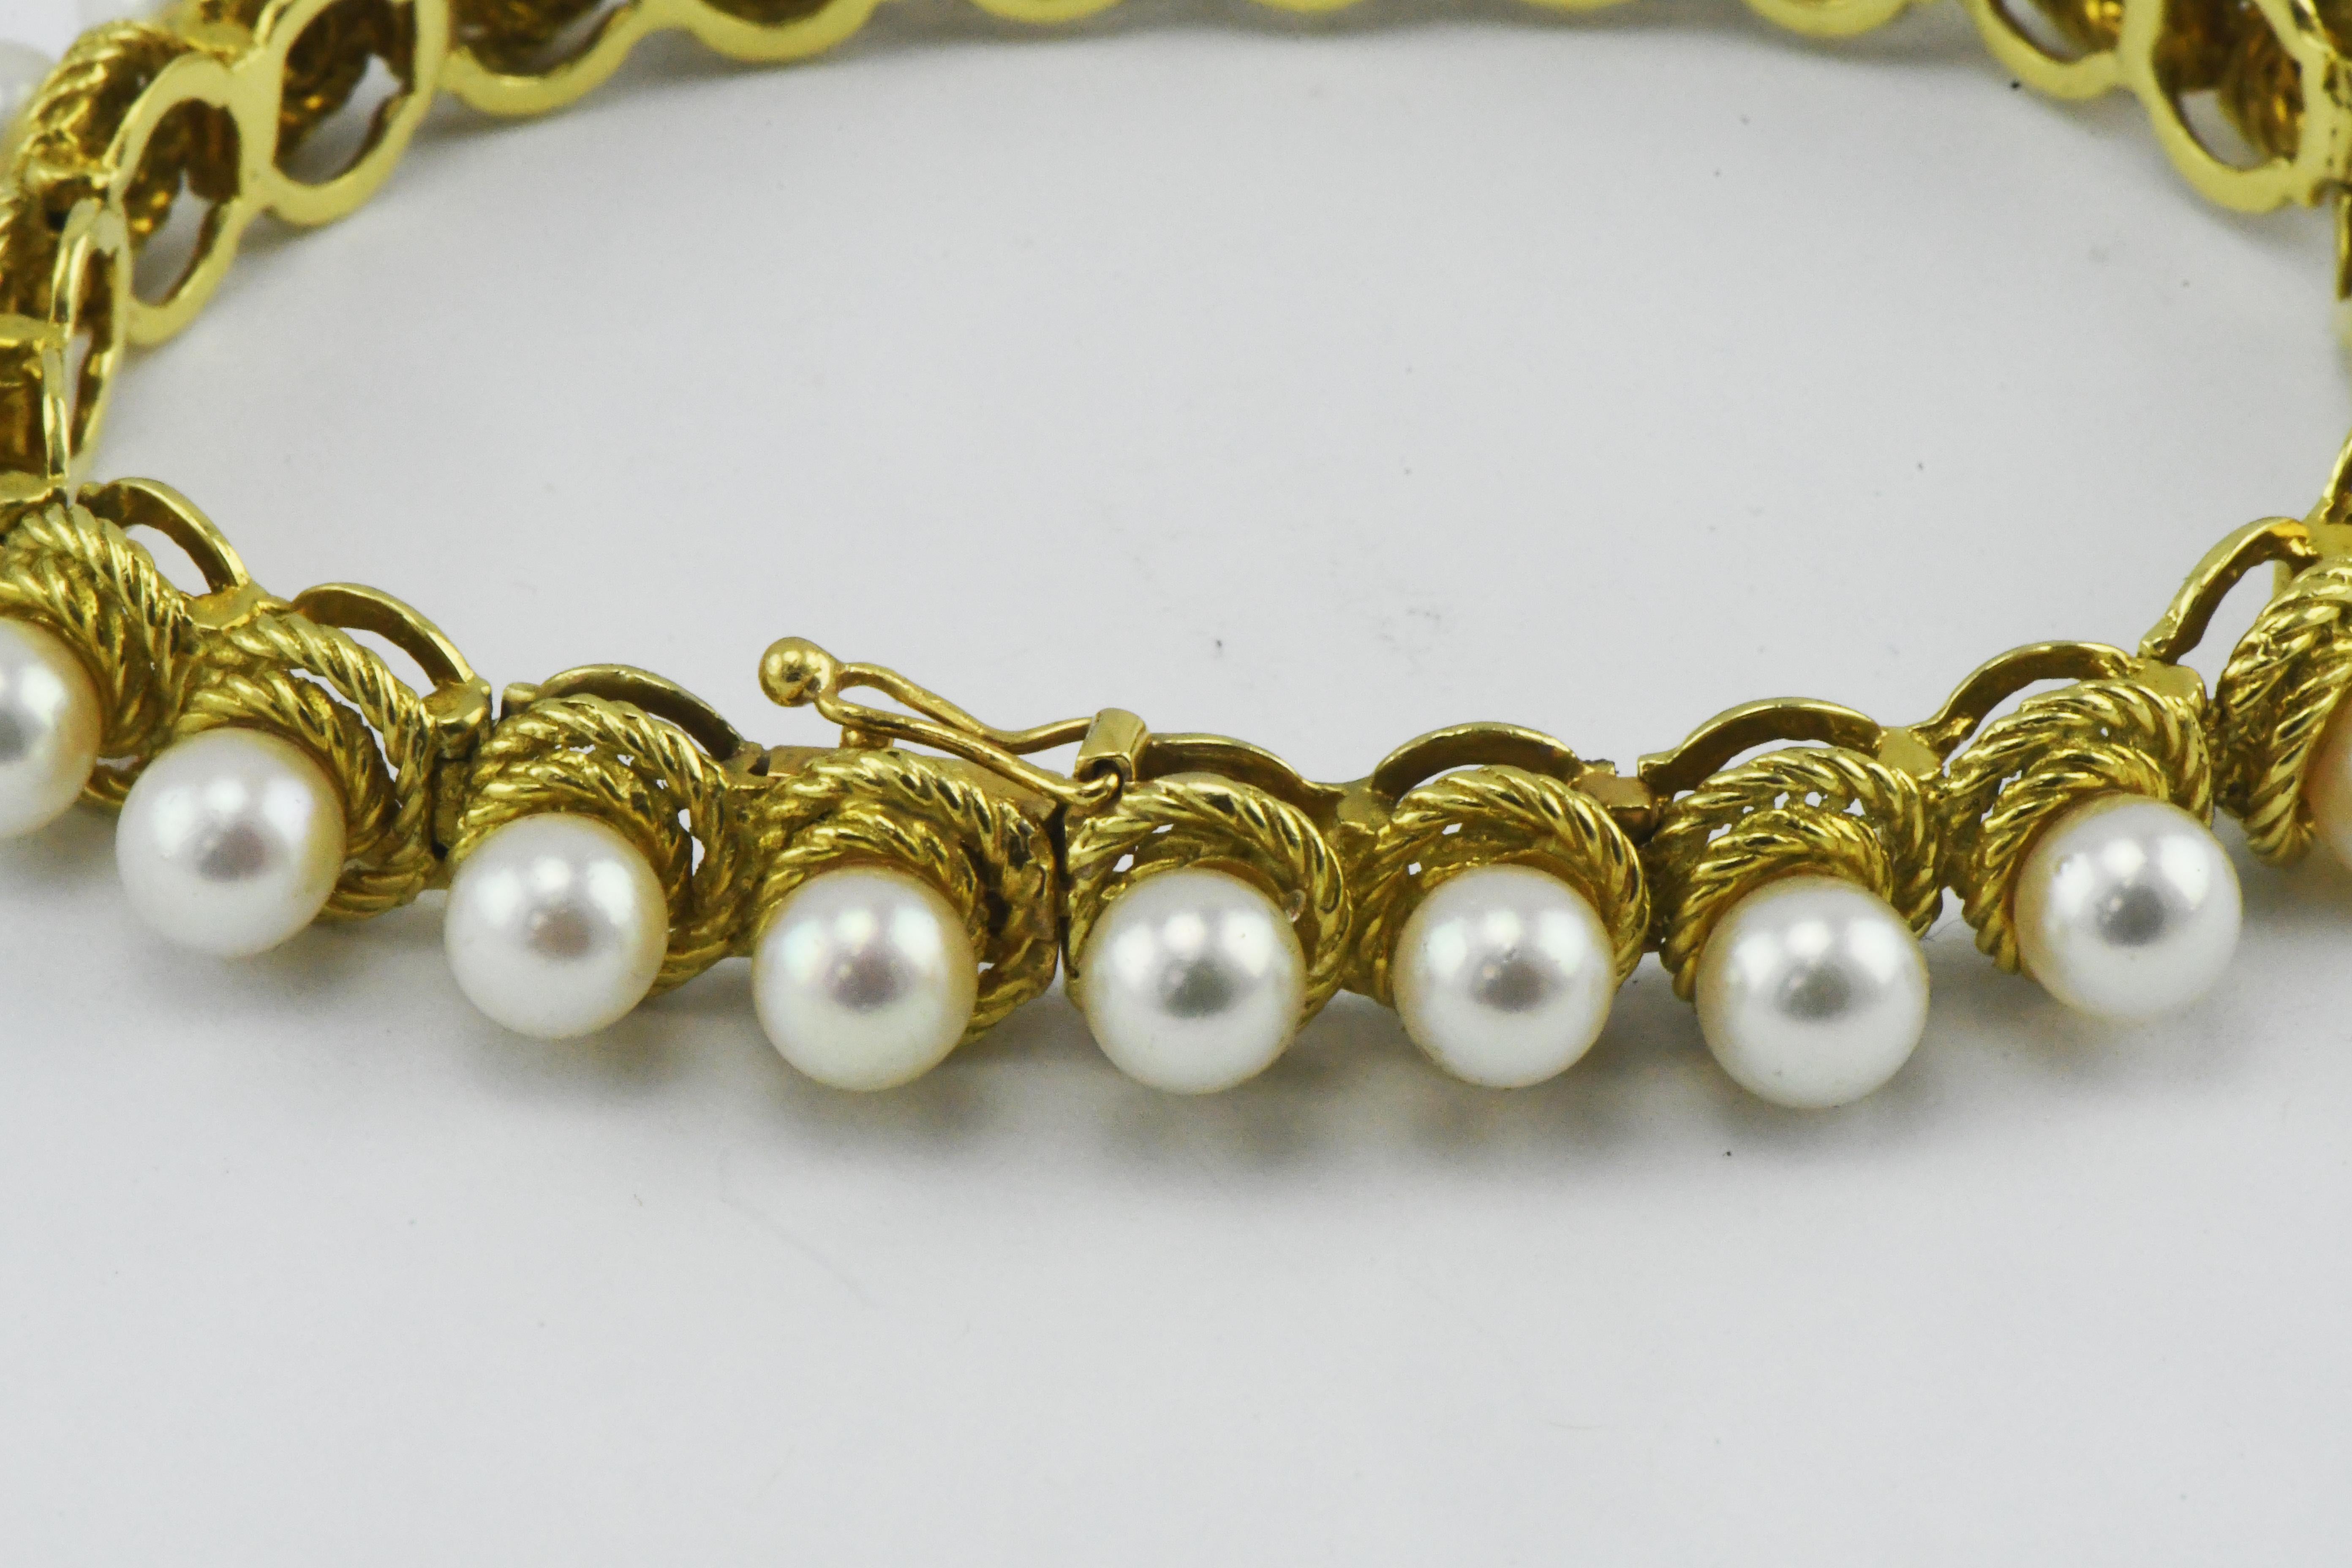 Hammerman Bros. 18 Karat Gold and 24 Pearl Bracelet, New York In Good Condition For Sale In Overland Park, KS